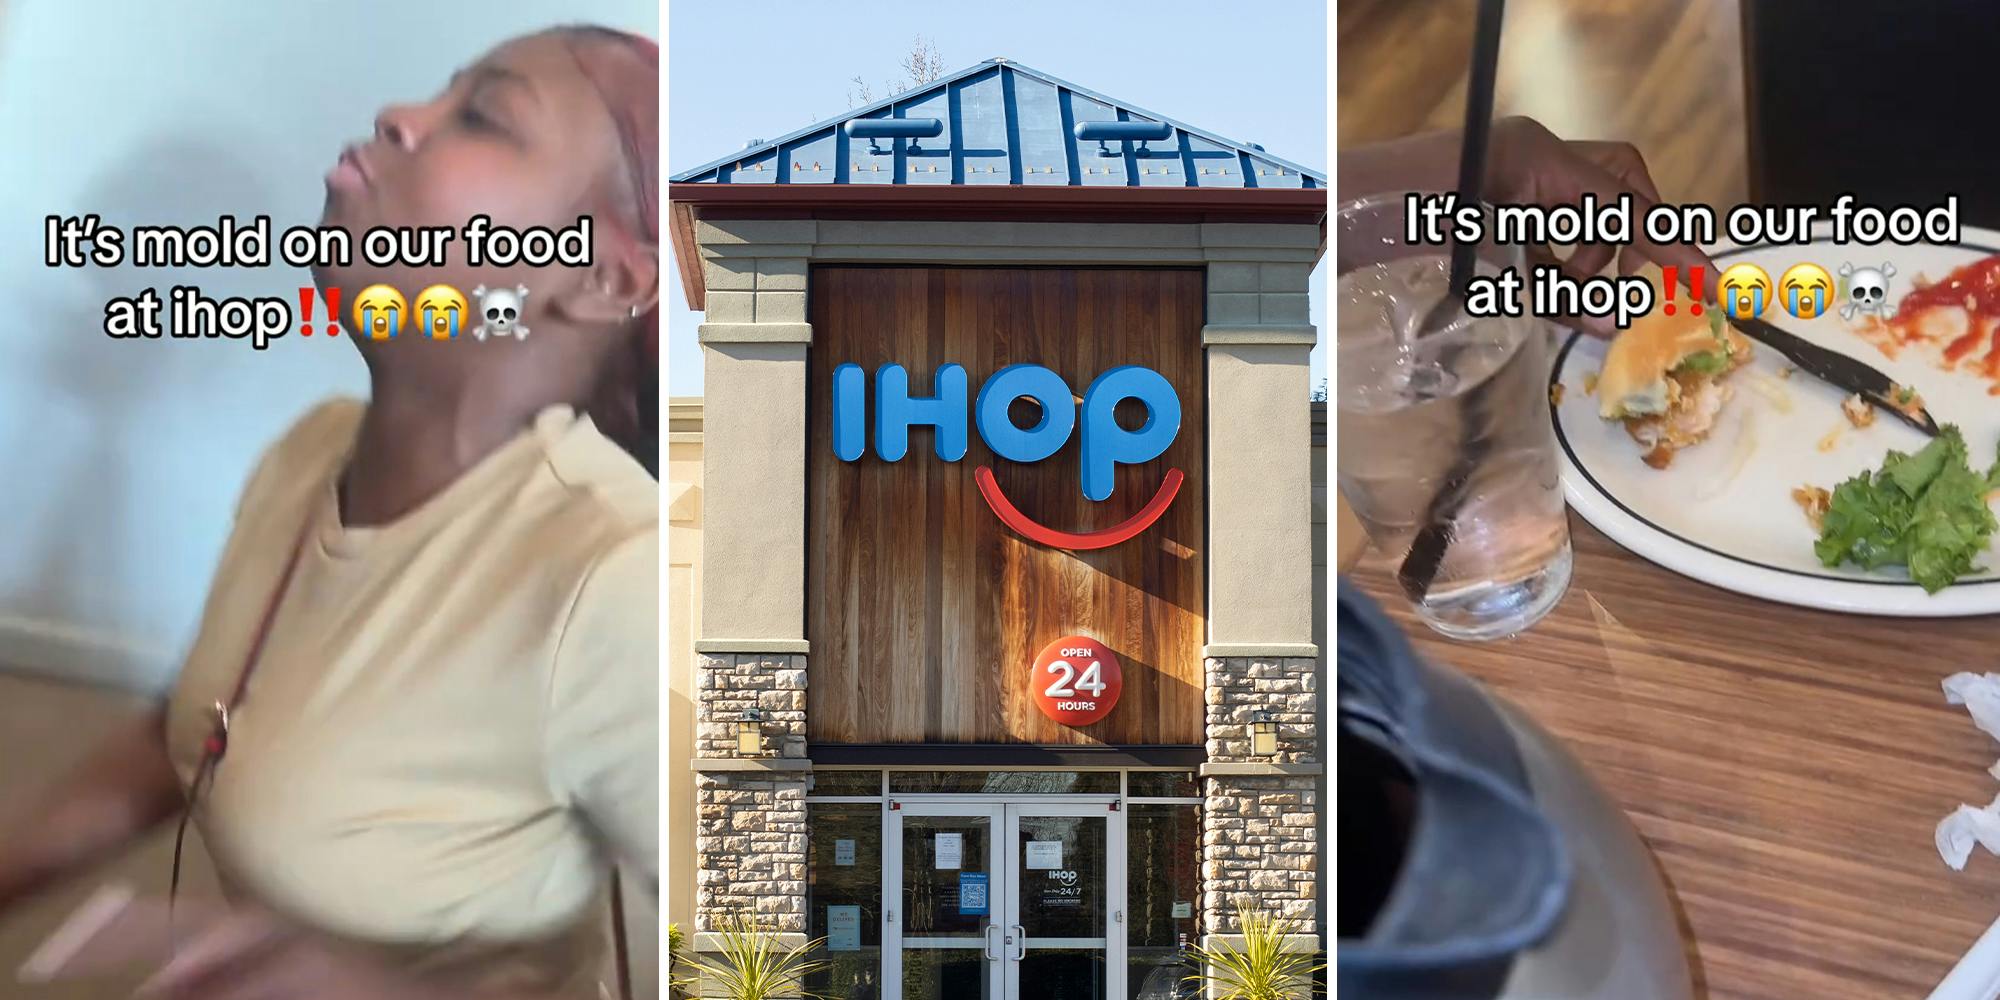 Customer finds something unusual in her food from IHOP